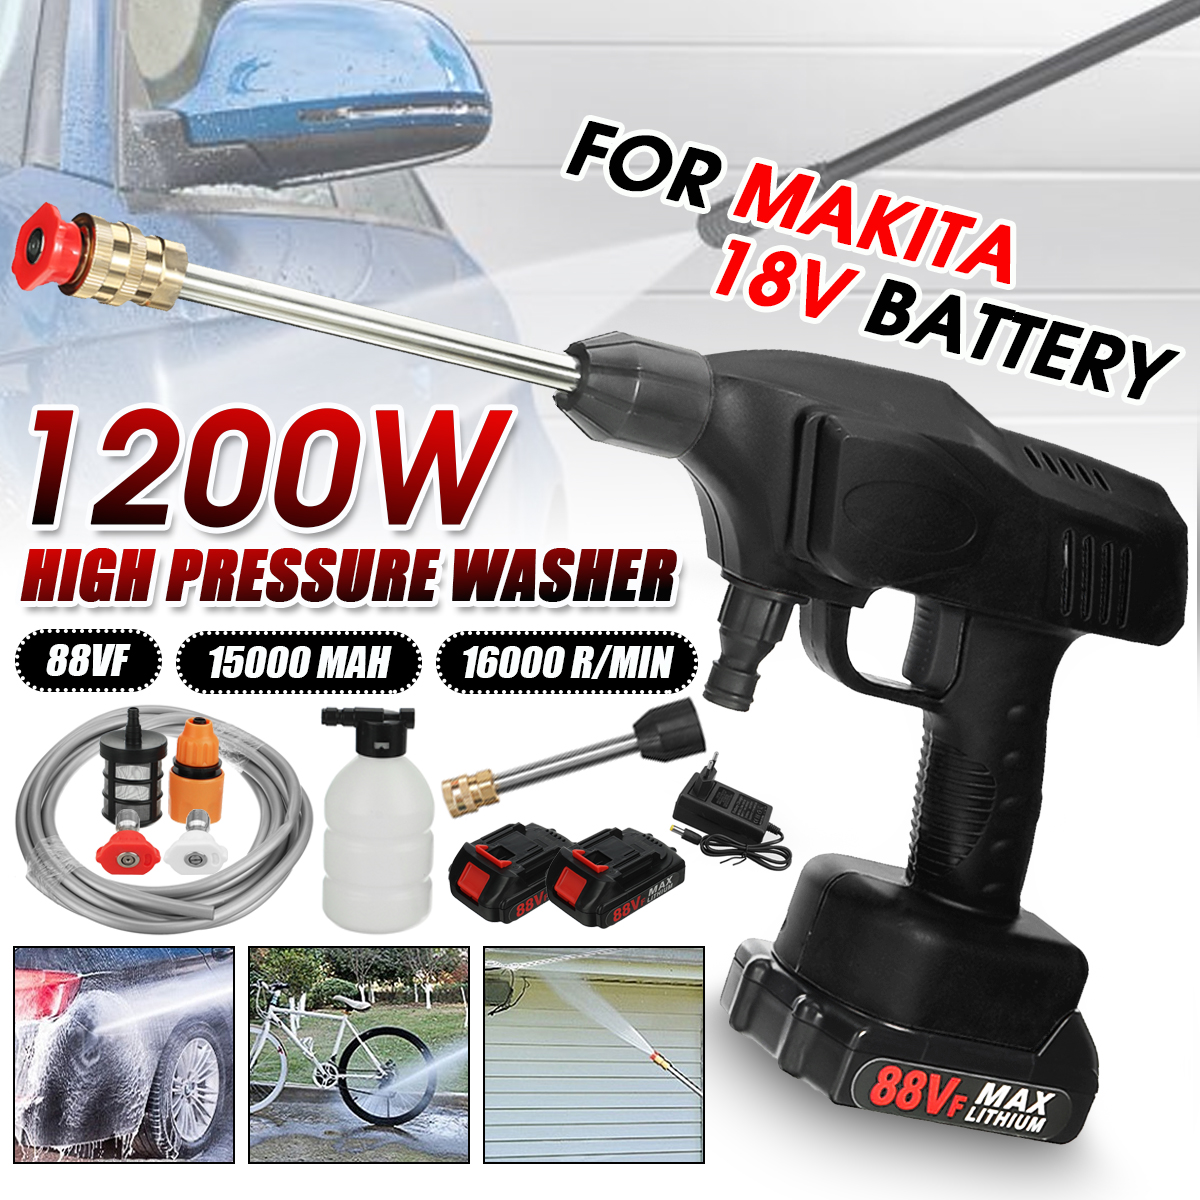 1200W-88VF-Portable-Cordless-Car-Washer-High-Pressure-Car-Household-Washer-Cleaner-Guns-Pumps-Tool-F-1891056-1